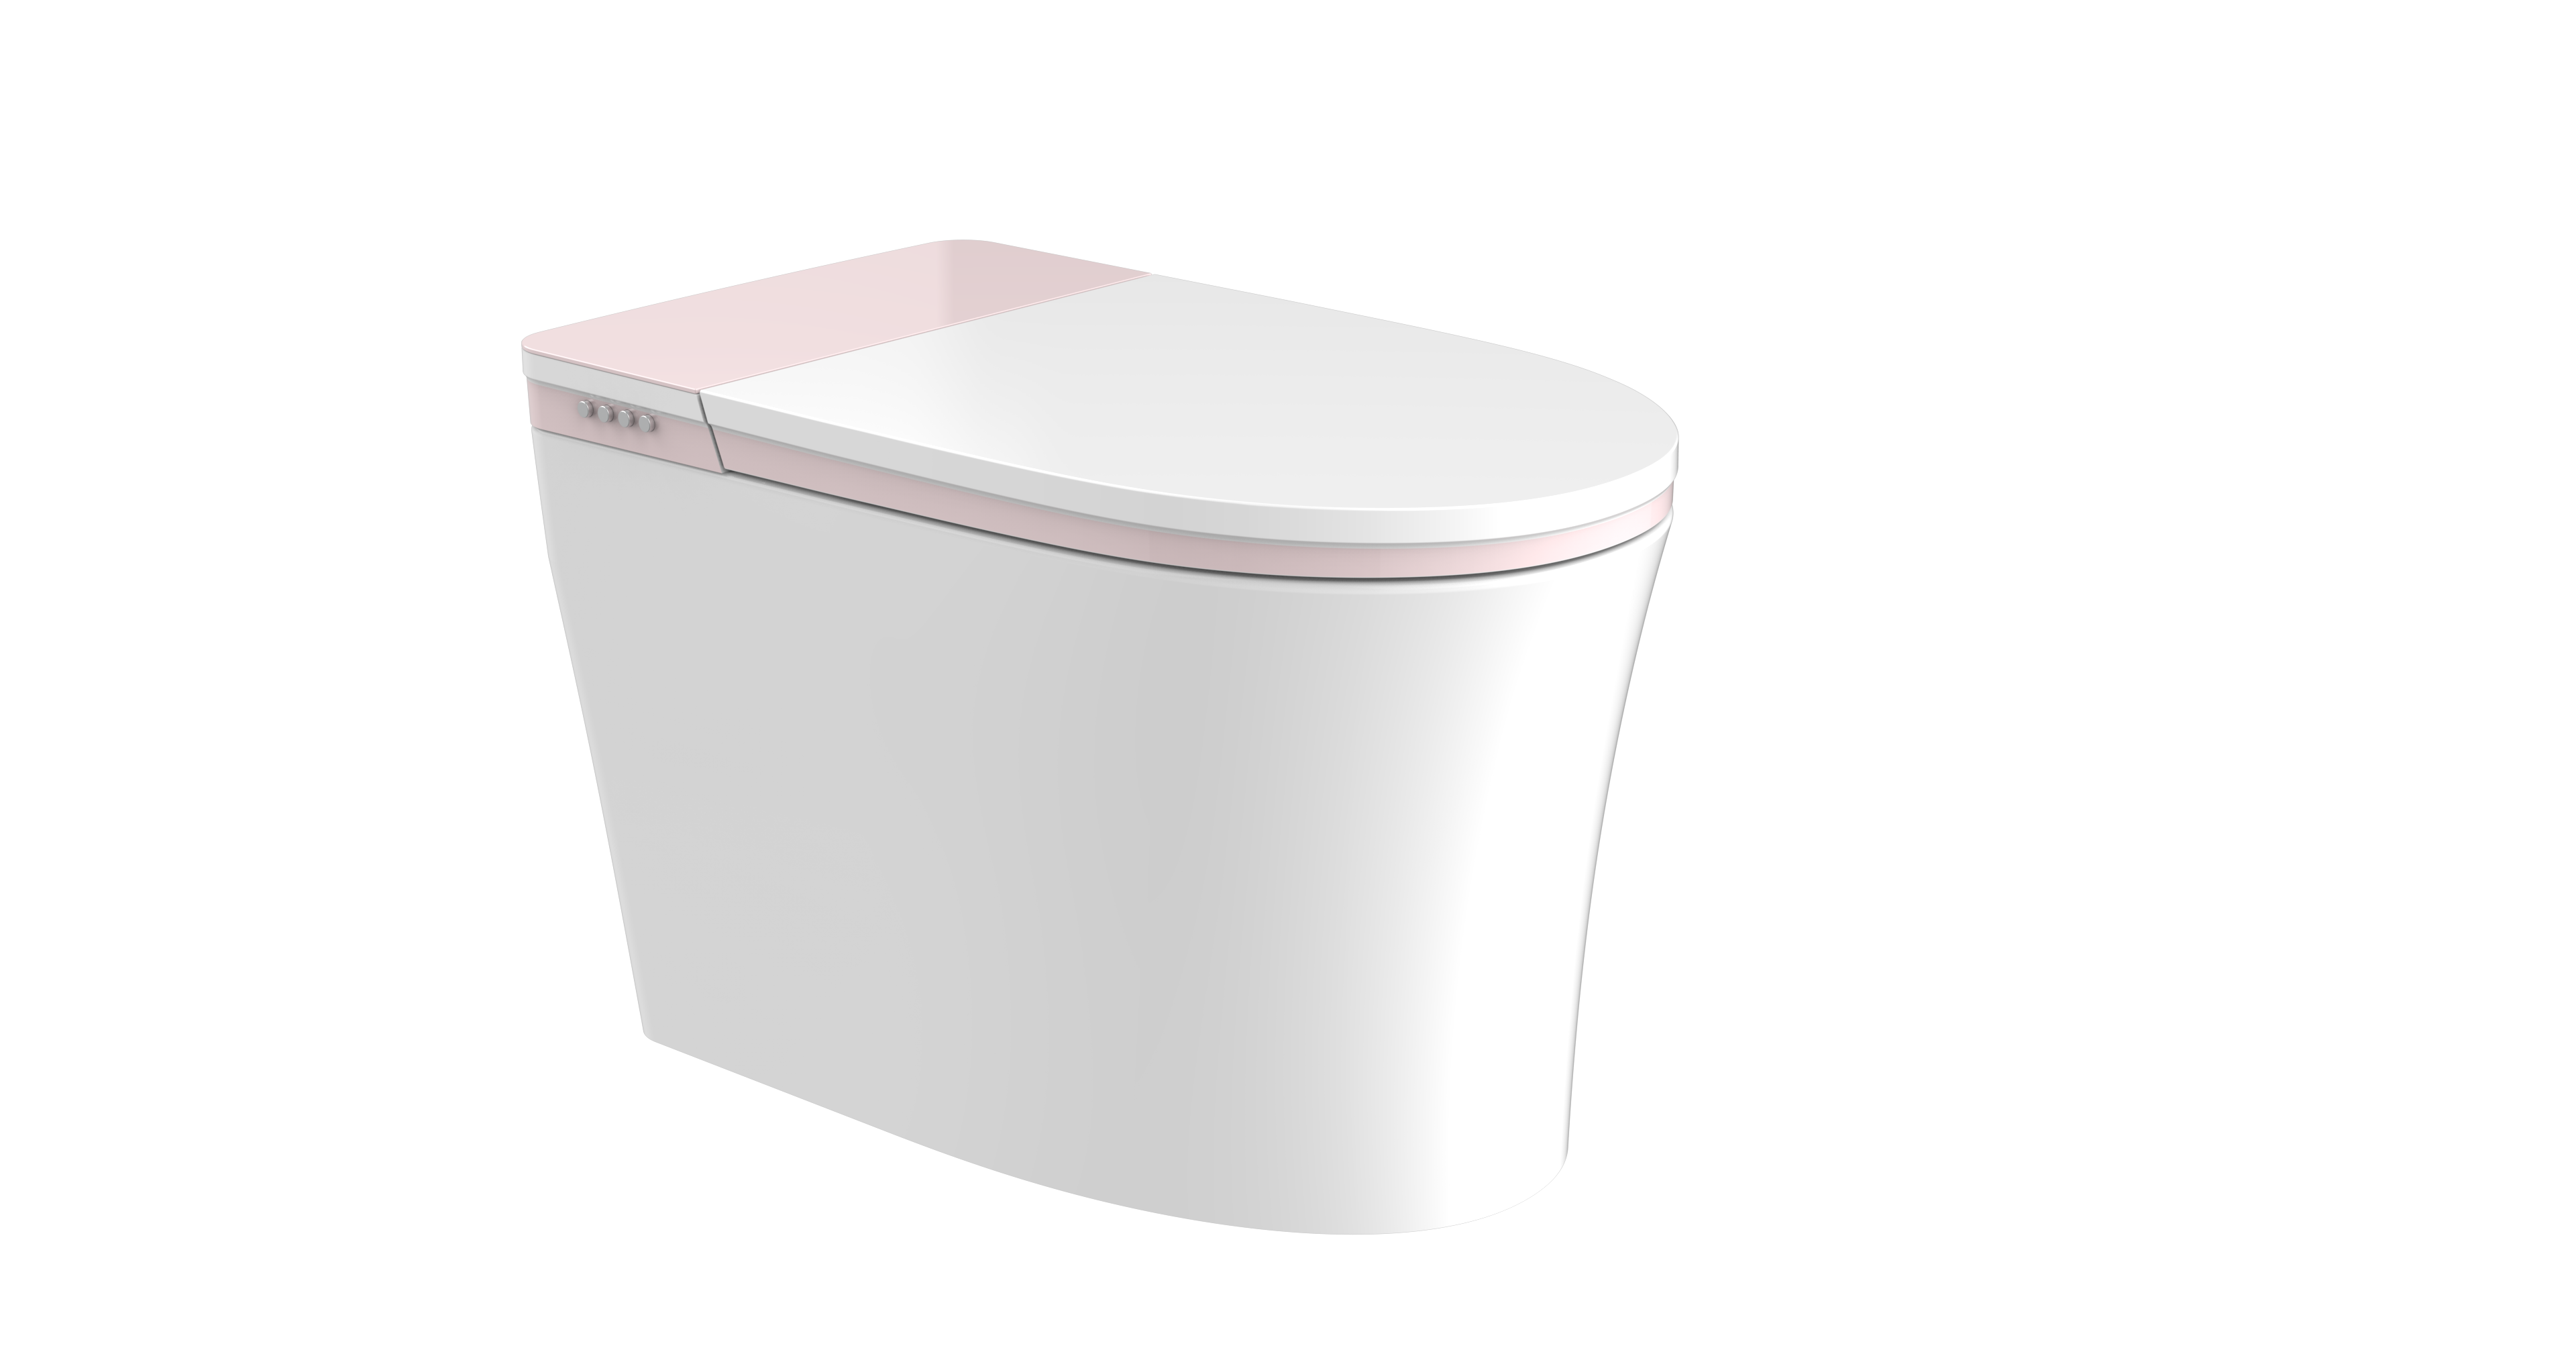 JT Accord 9011 bidet toilet with pink cover